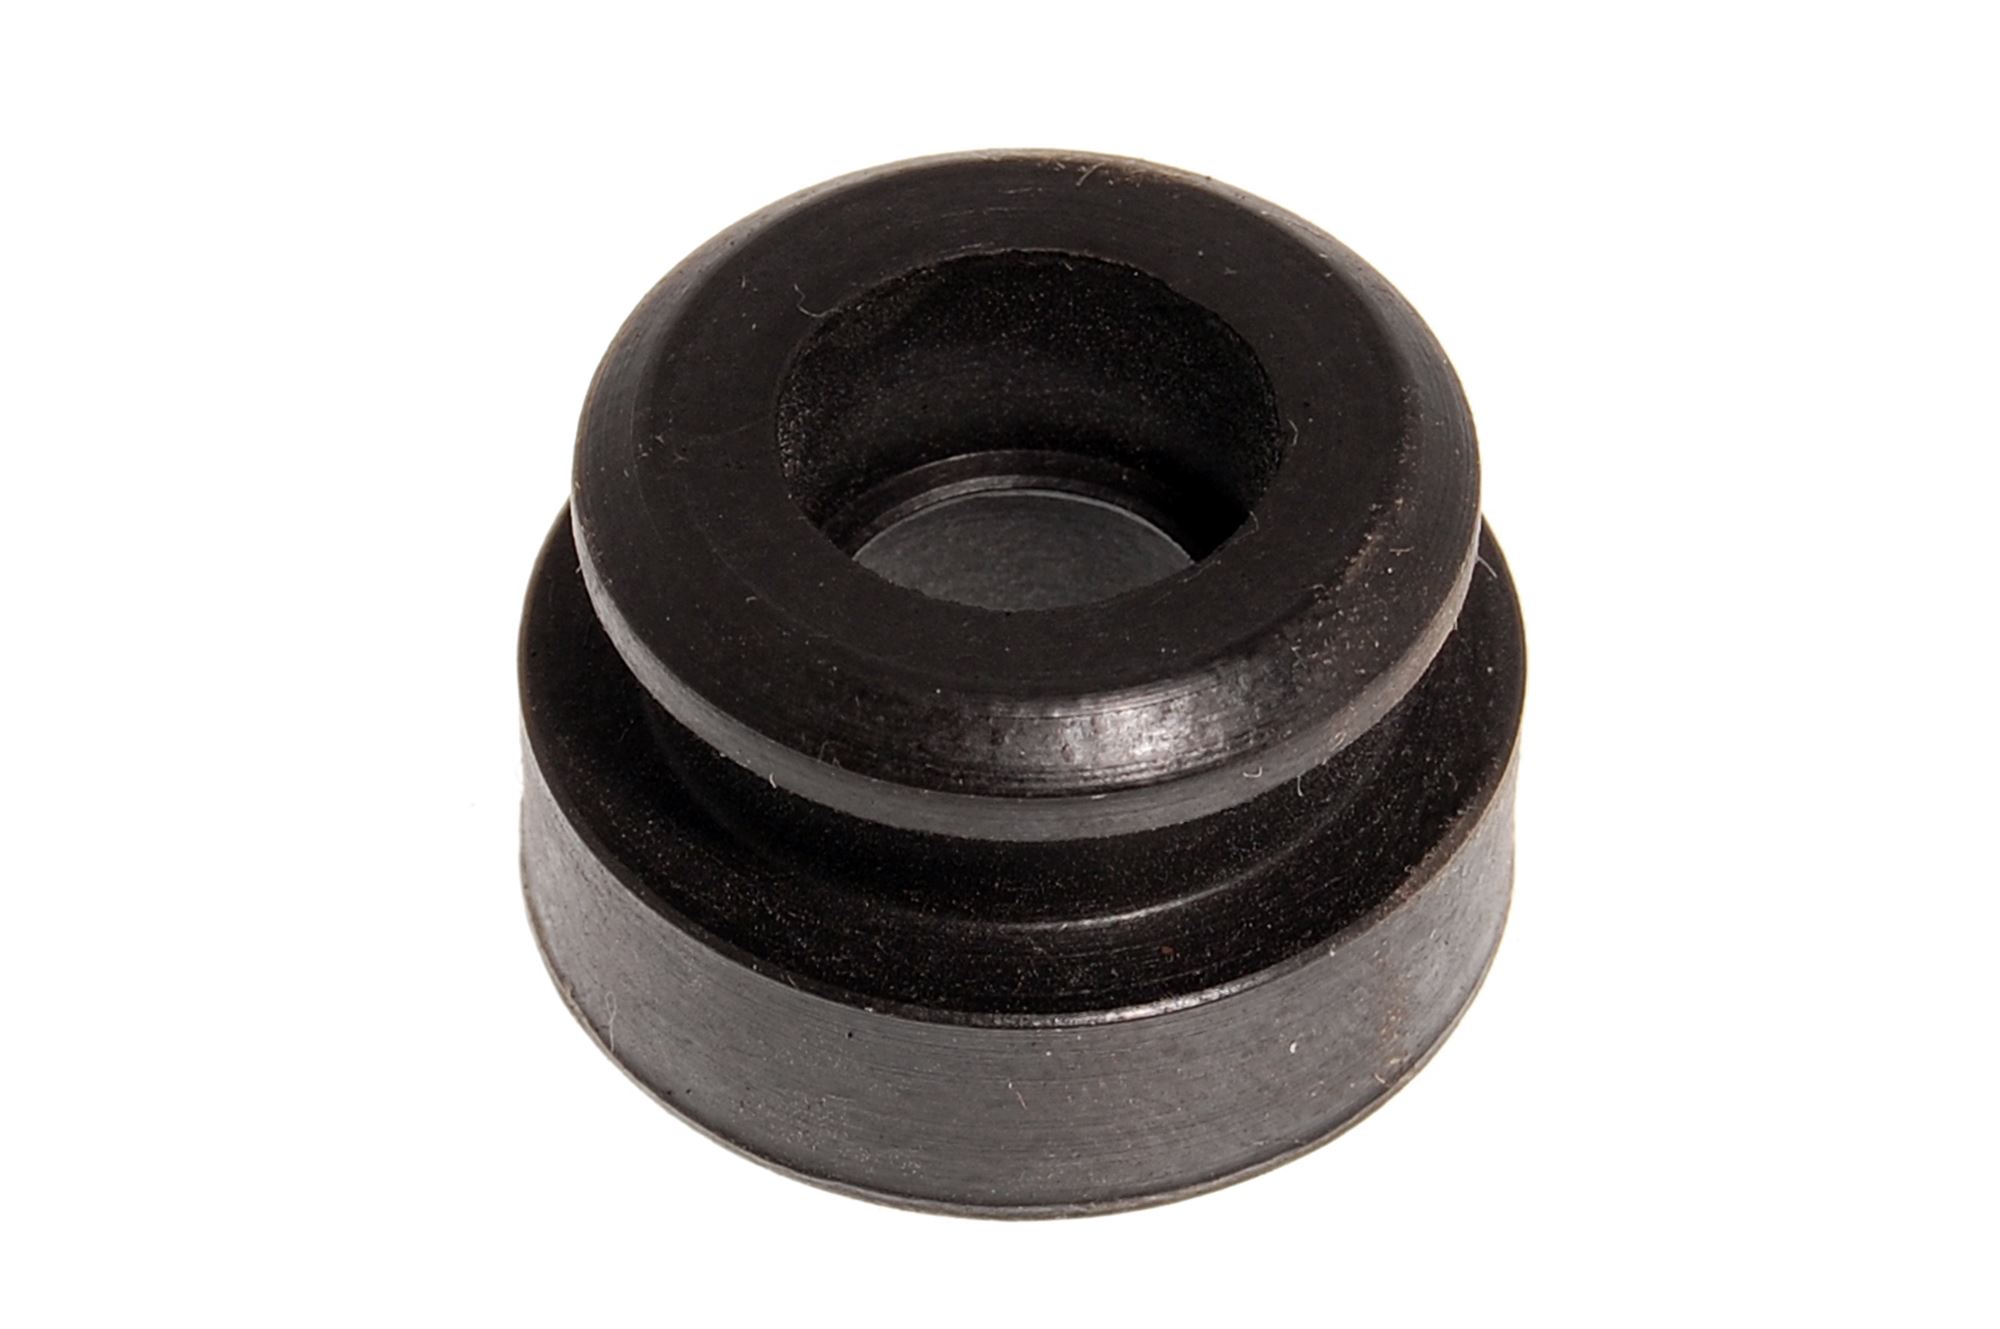 Mounting-rubber - PCG000060 - Genuine MG Rover | Rimmer Bros